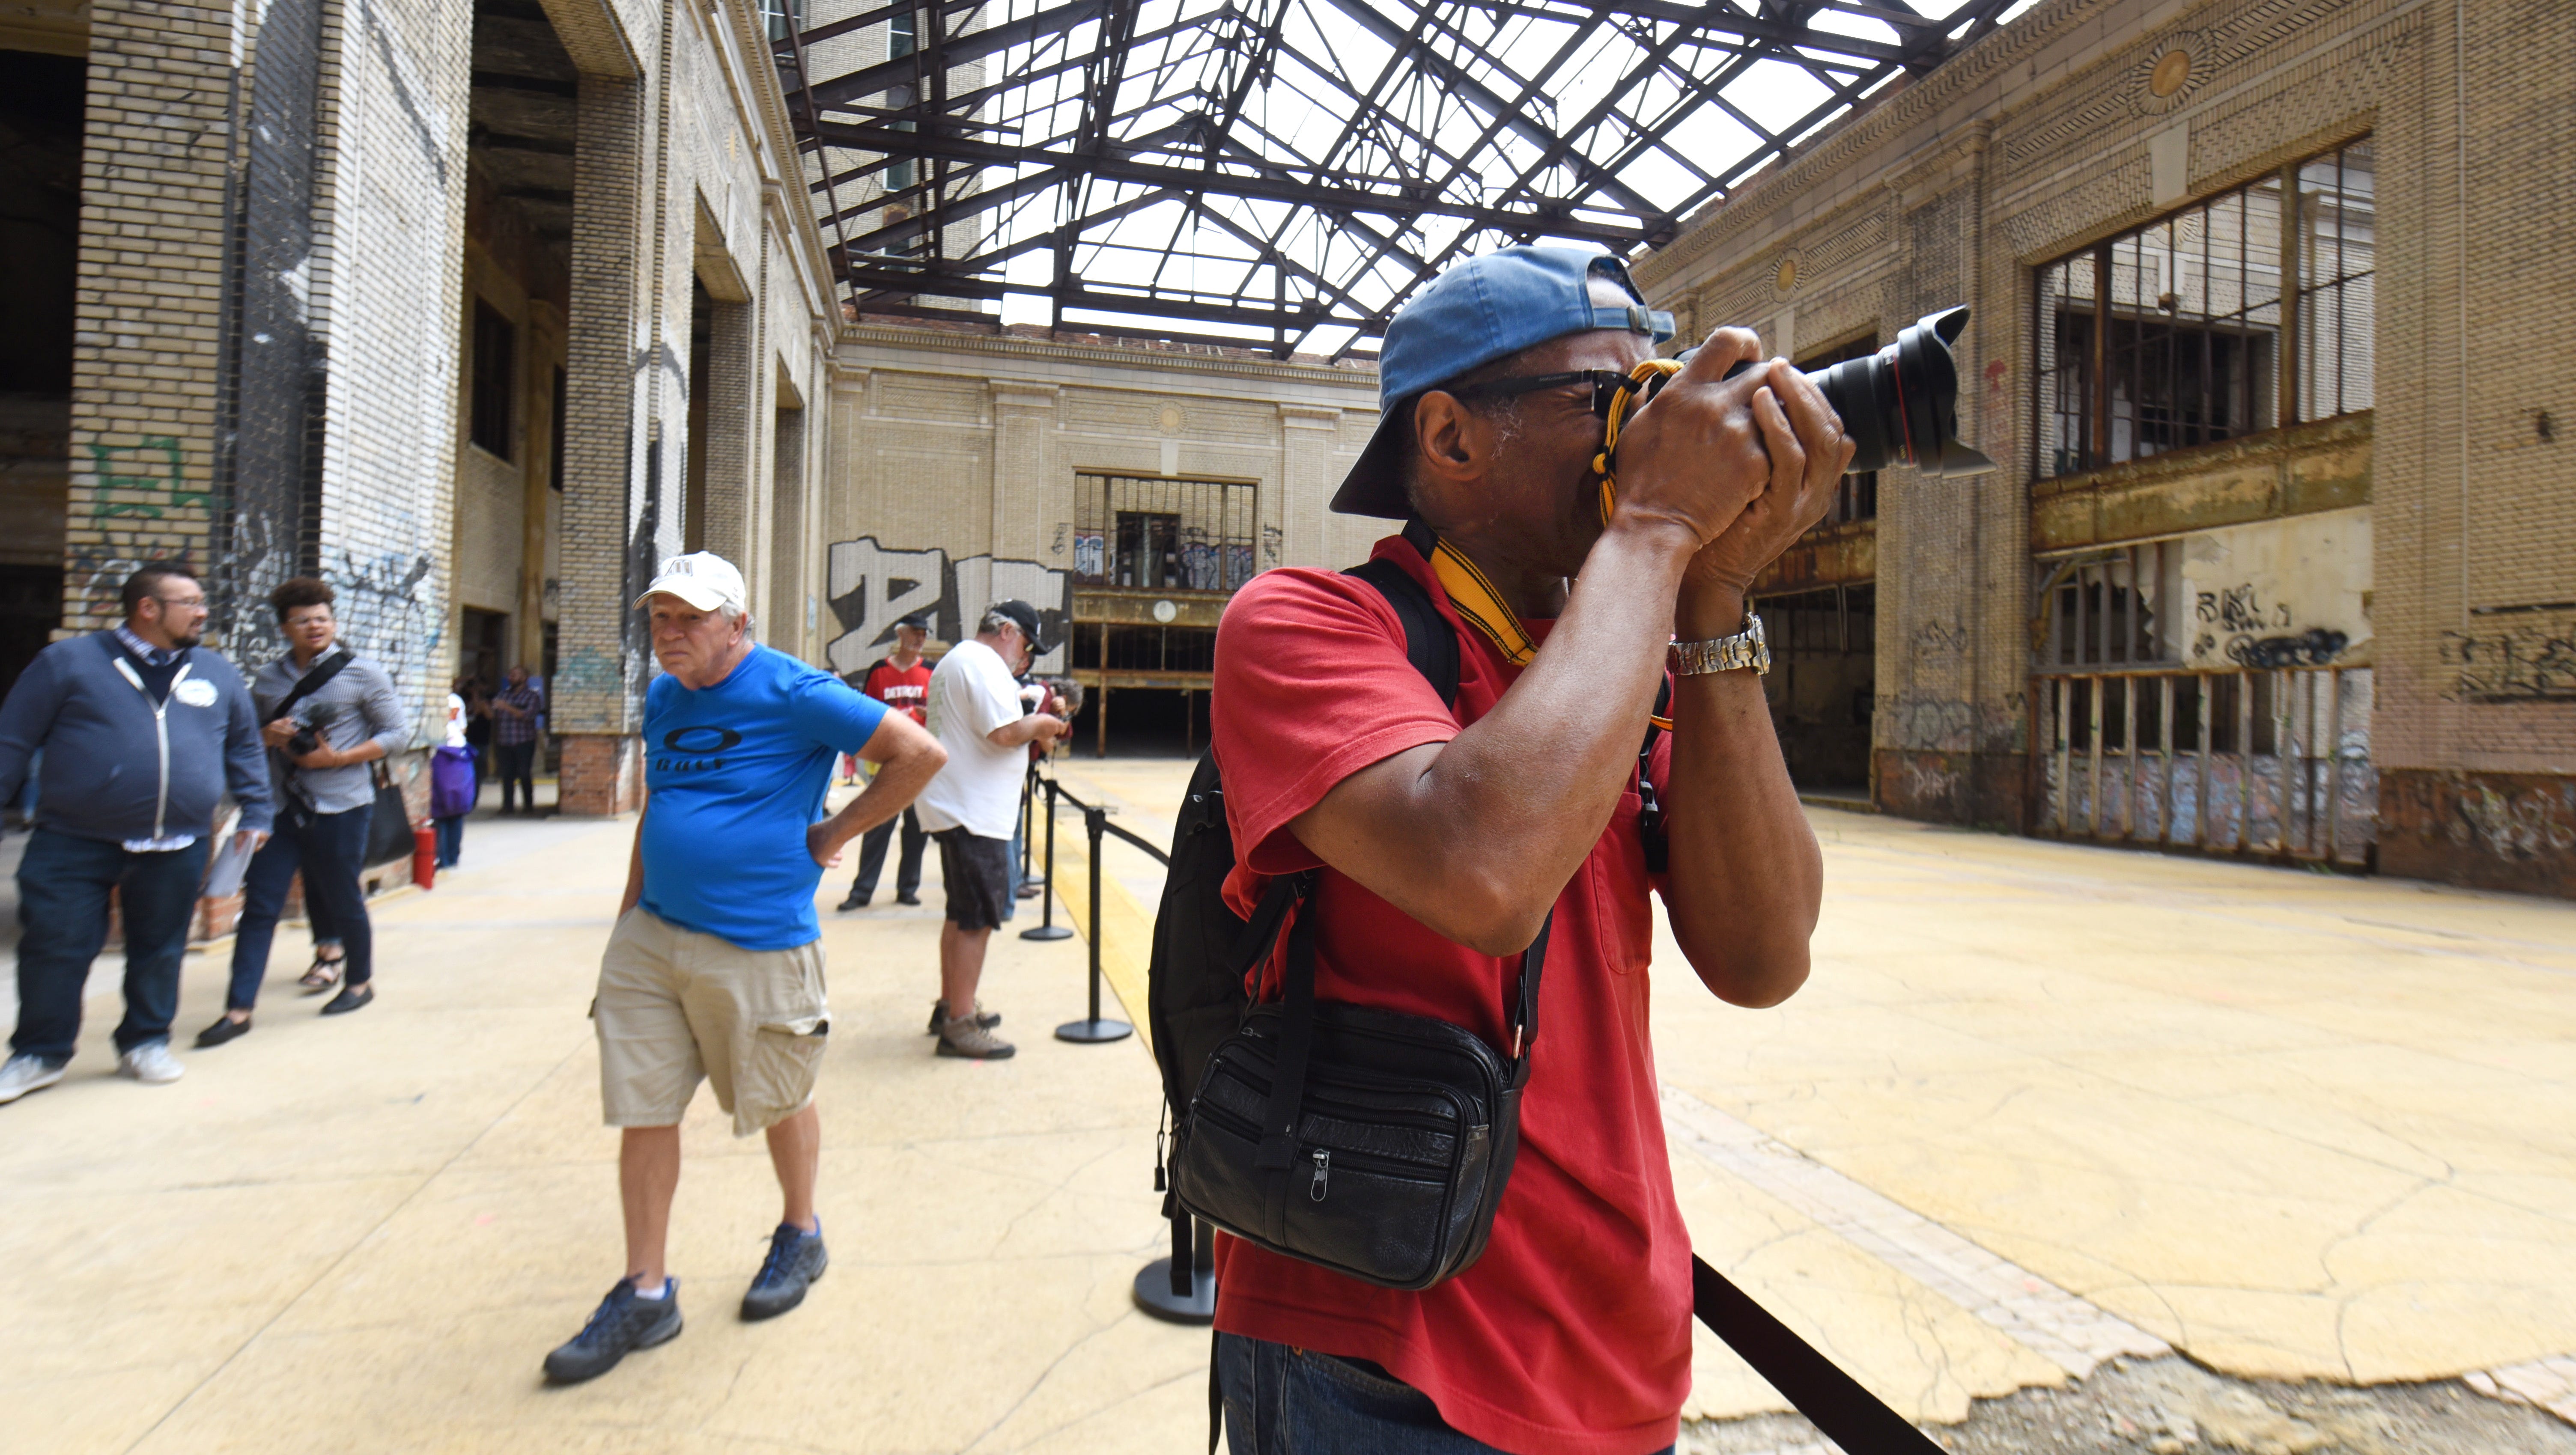 Photographer Ulysses Freeman of Detroit snaps hundreds of images of the concourse area in the Michigan Central Train Depot.